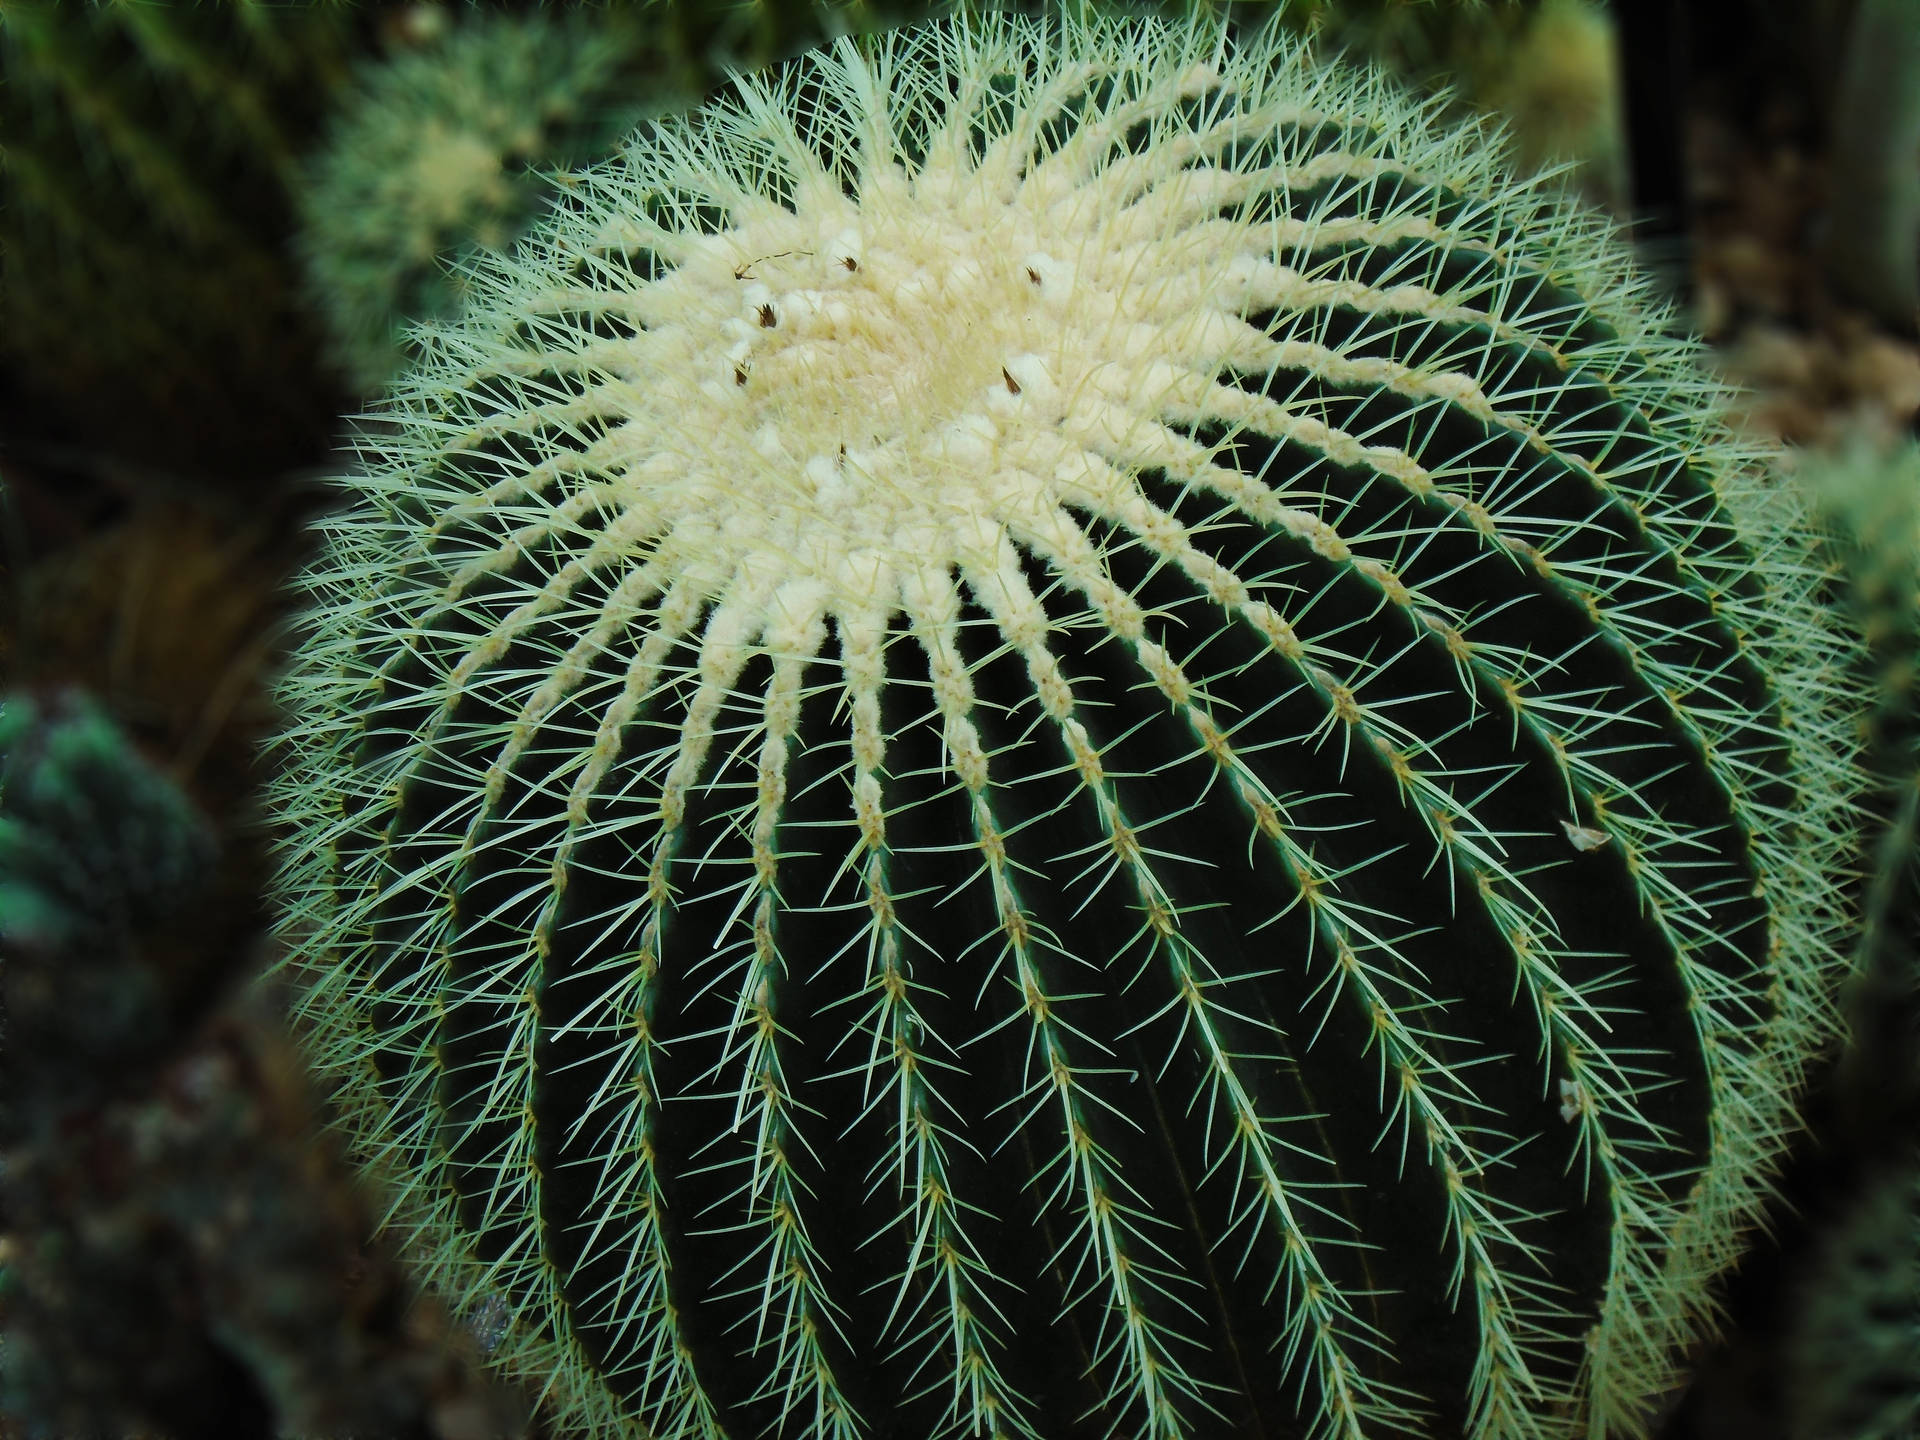 A close up of round cactus spines. Wallpaper